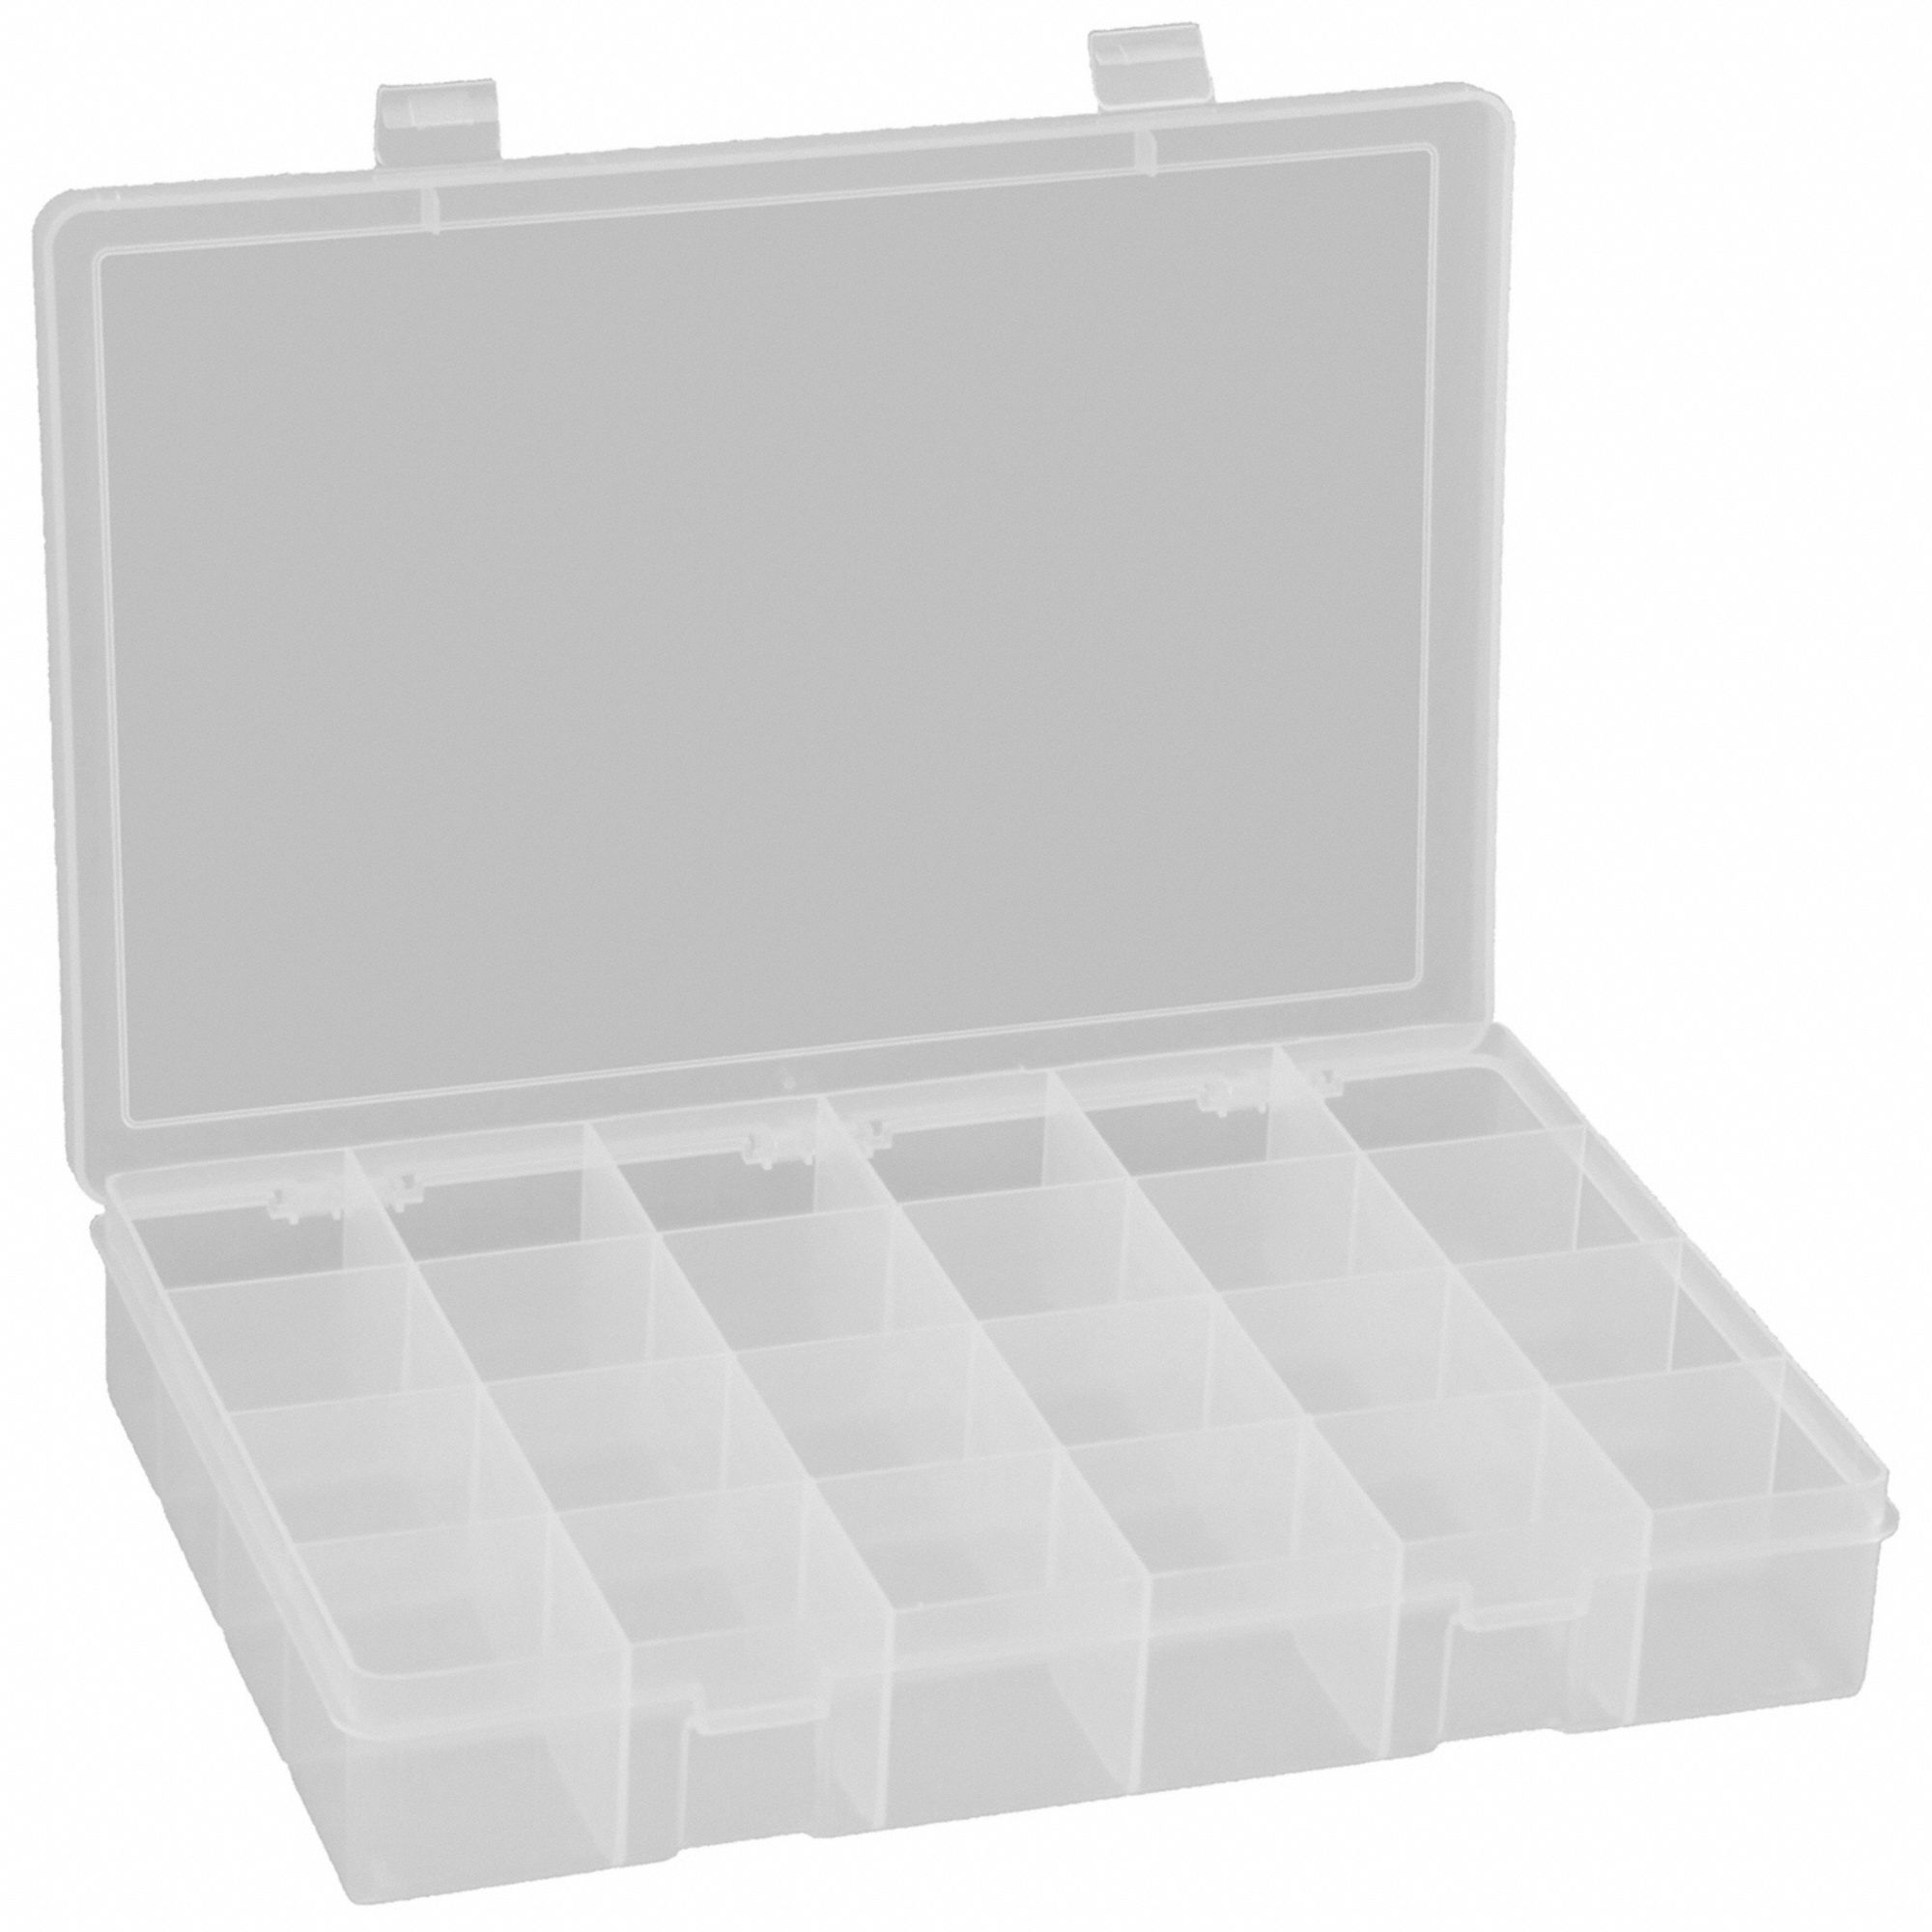 DURHAM Compartment Box - 18x12x3 - (13) Compartments - With Adjustable  Dividers - Lot of 4